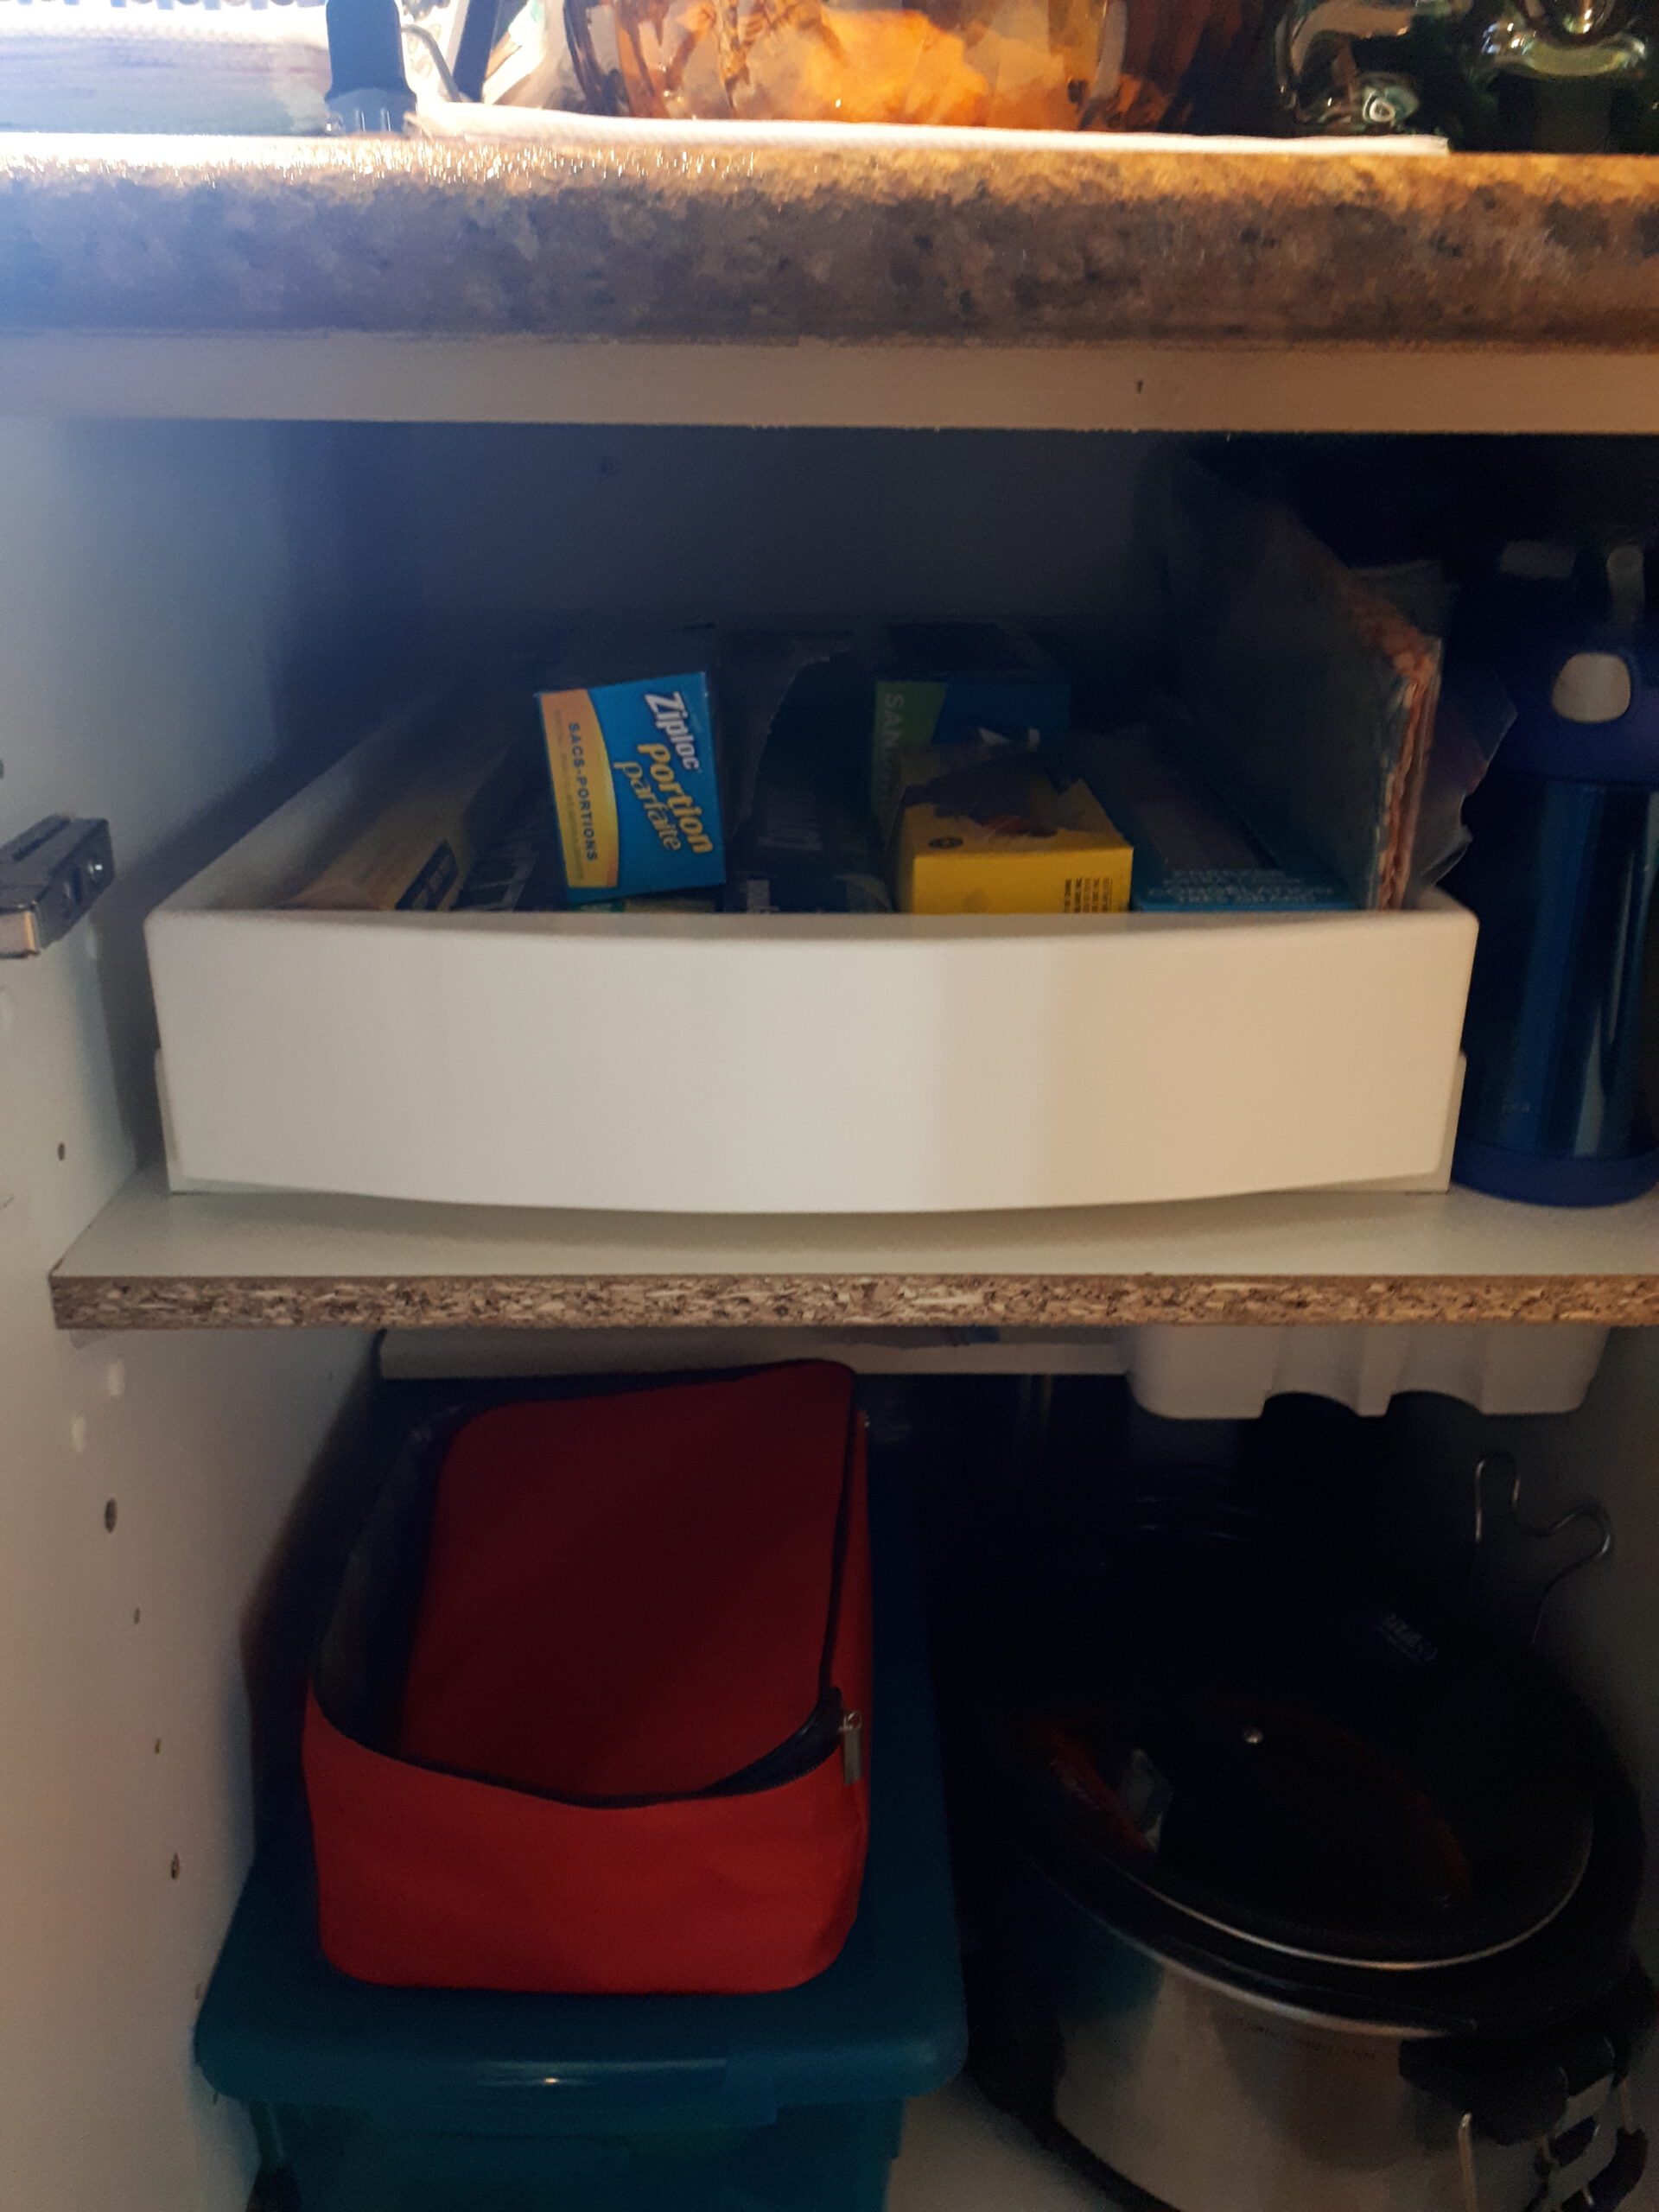 Slide Out Kitchen Drawers - Four Secrets That Nobody Will Tell You